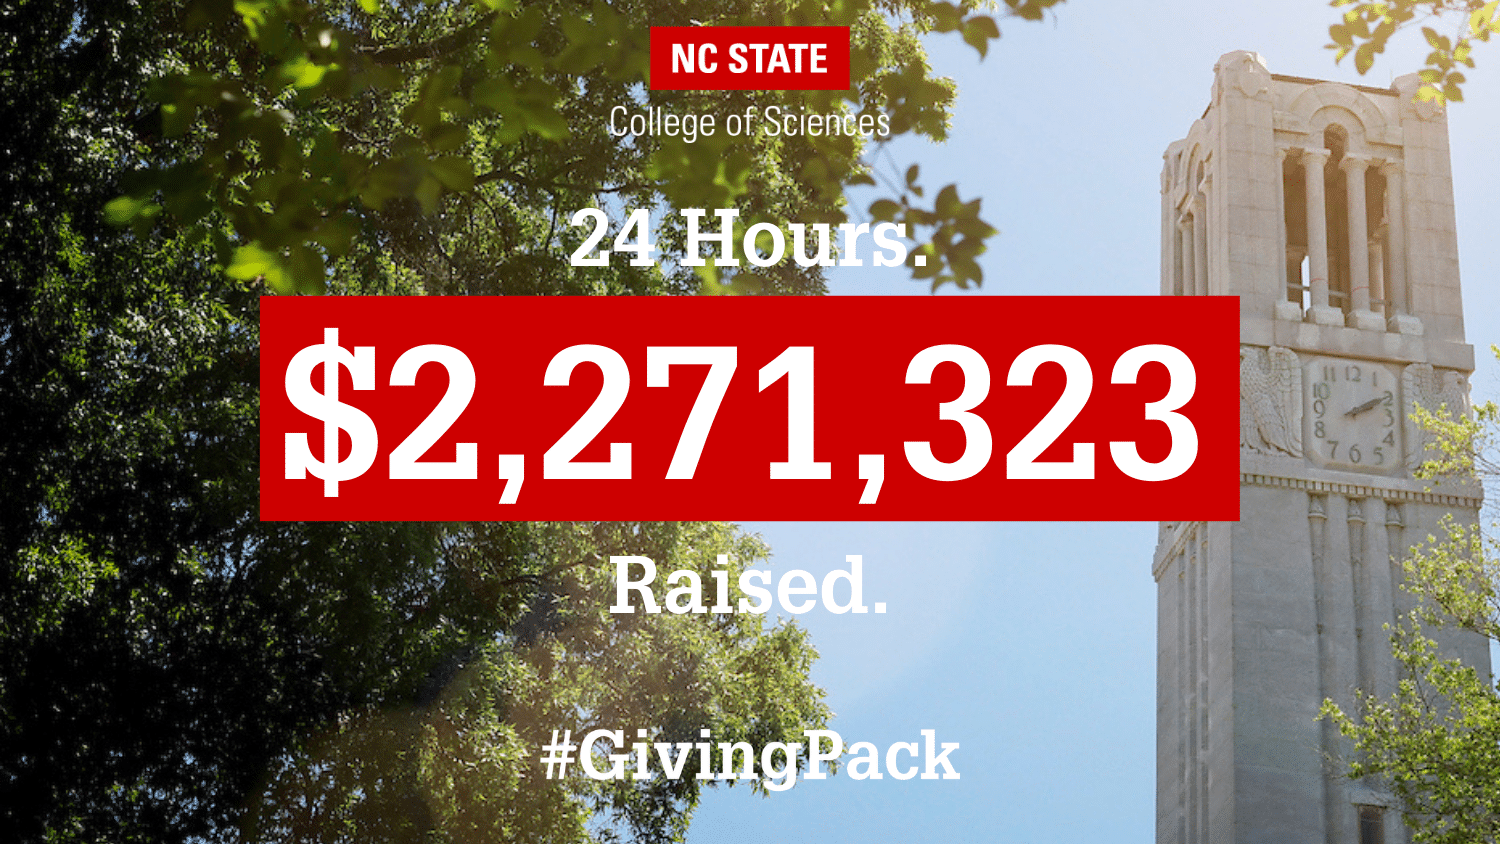 A photo of the NC State Belltower with the words "24 Hours. $2,272,323 raised." and the NC State College of Sciences logo